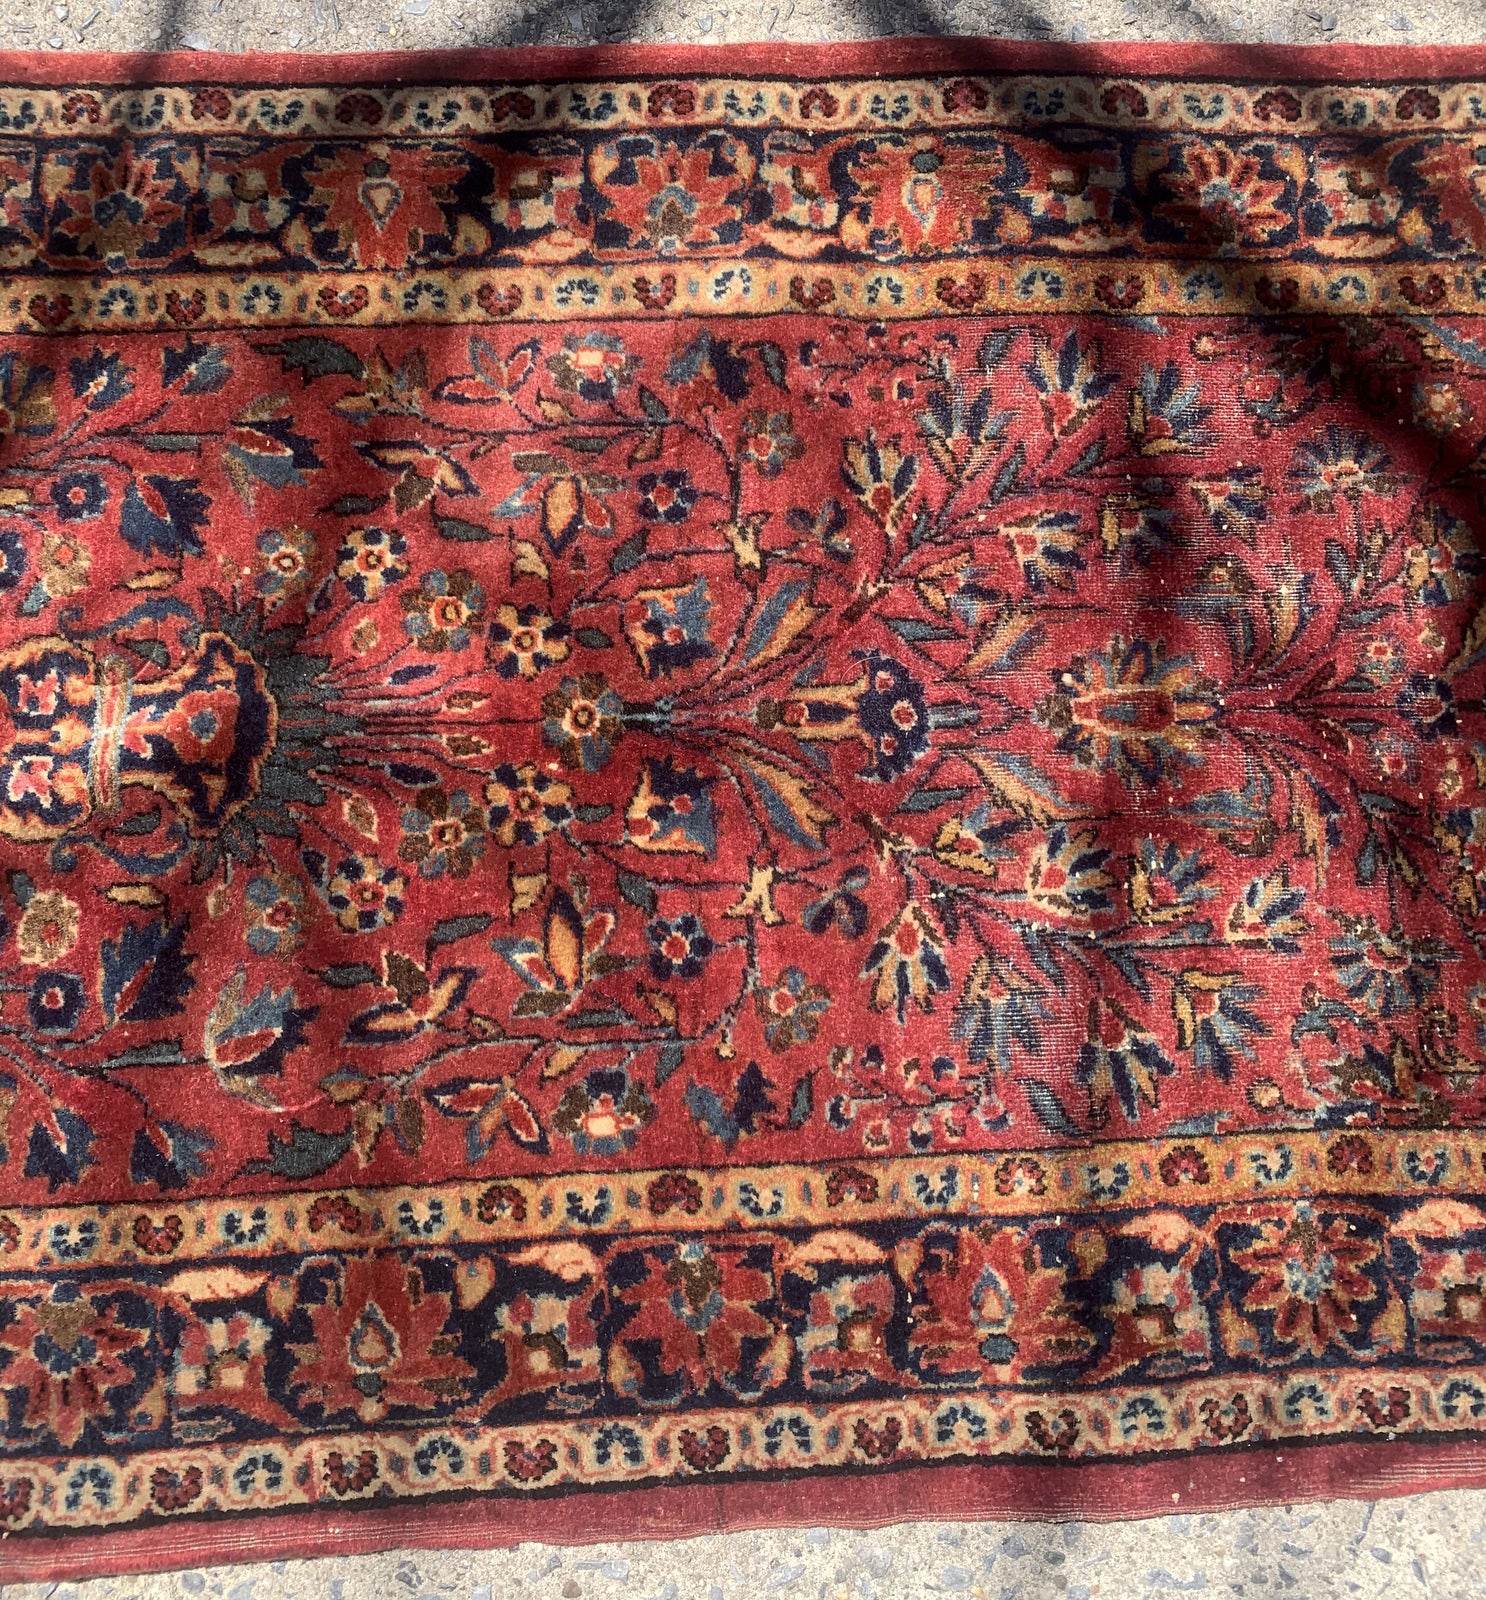 Handmade antique Persian Sarouk rug in red color. The rug is from the beginning of 20th century in original condition, it has some low pile. This rug is prayer.